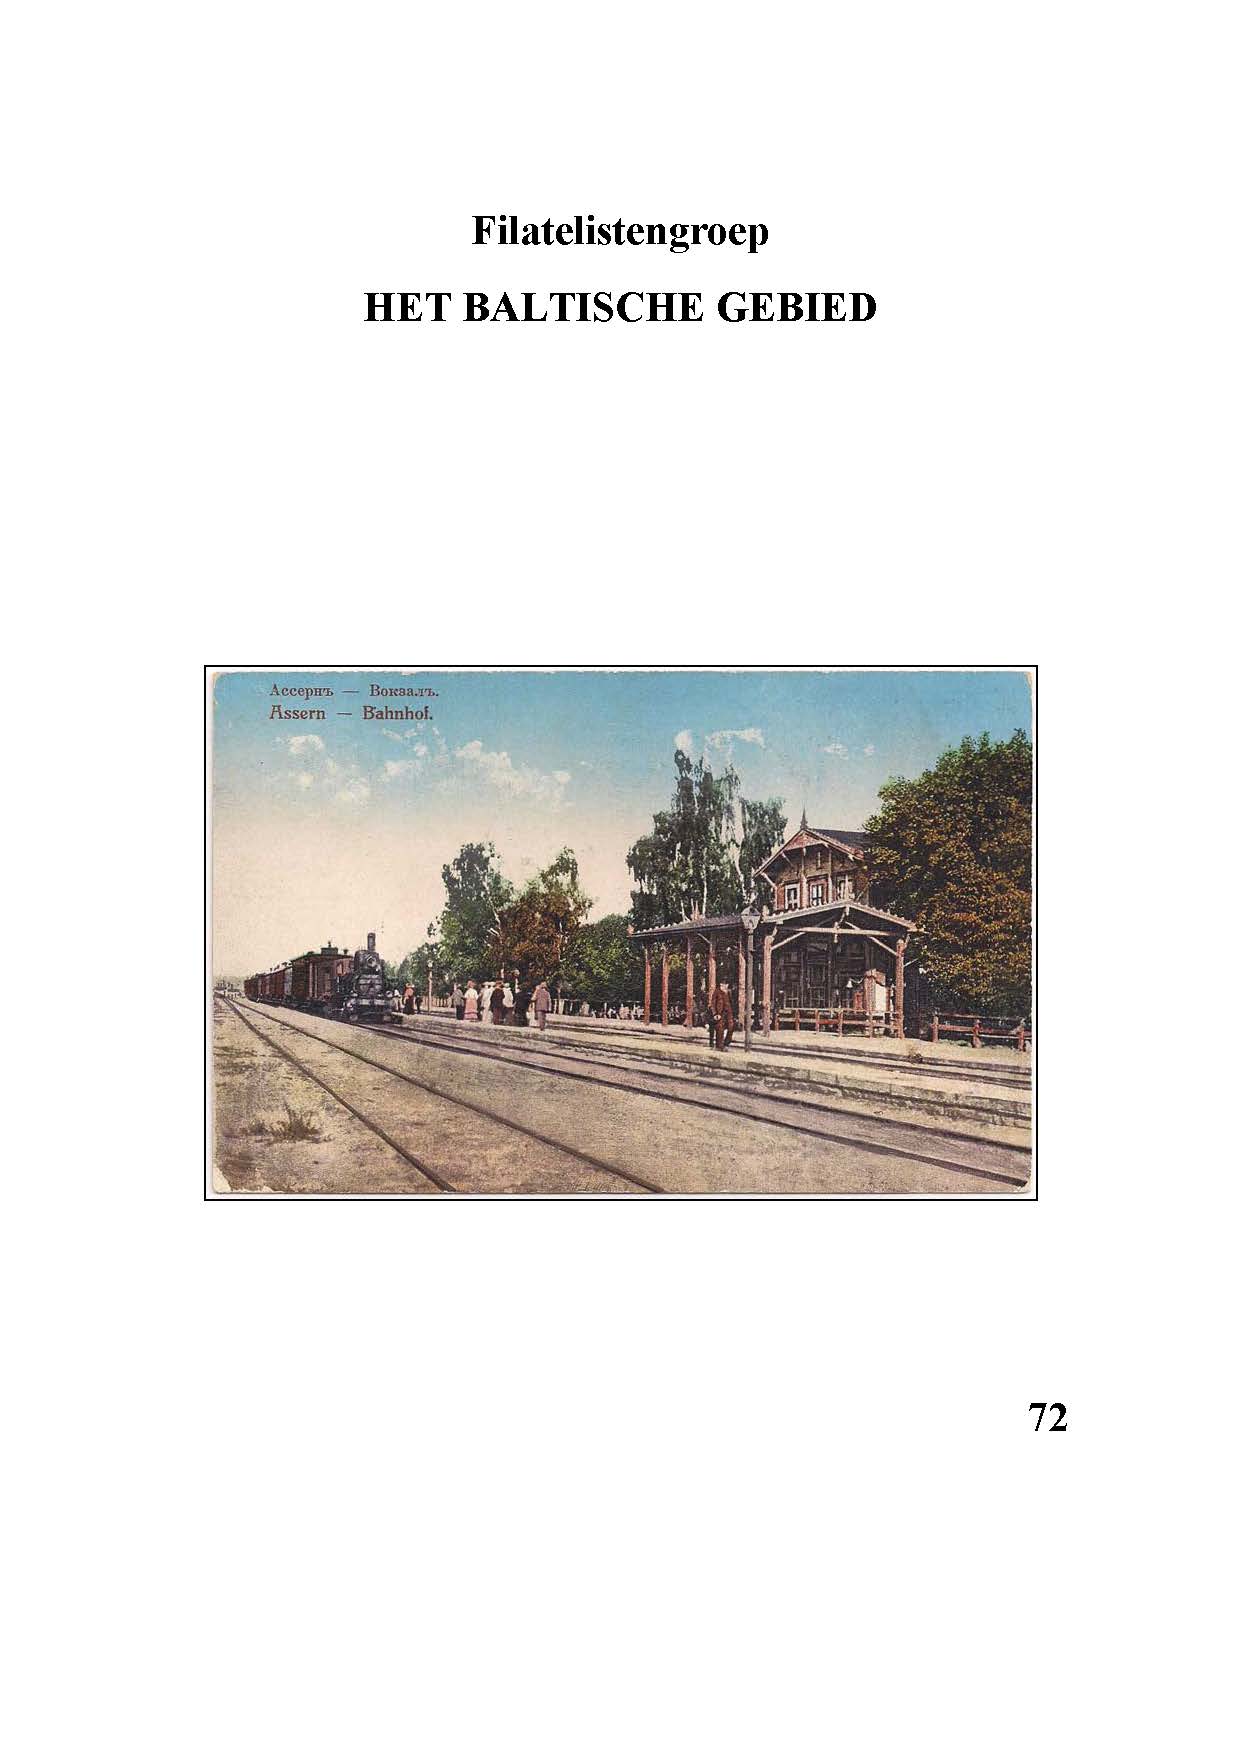 From the beginning of 2018 the ArGe Baltikum and the Dutch Filatelistengroep 'Het Baltische Gebied' as well as 'Rossica' will exchange not only their archives but also their latest newsletters.